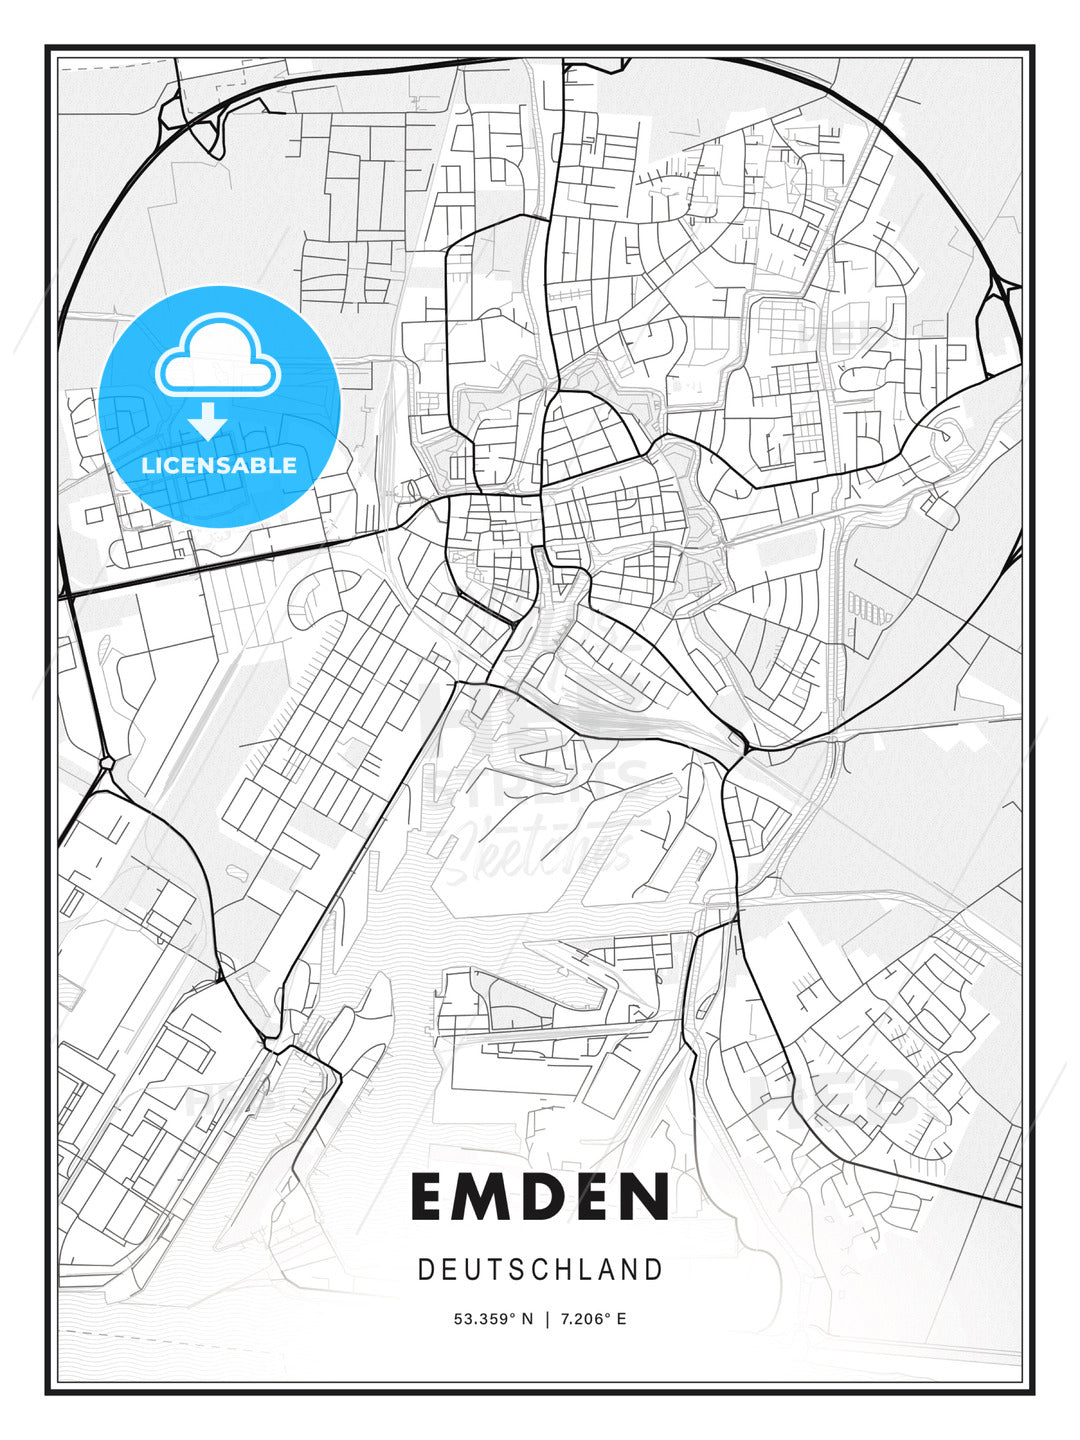 Emden, Germany, Modern Print Template in Various Formats - HEBSTREITS Sketches